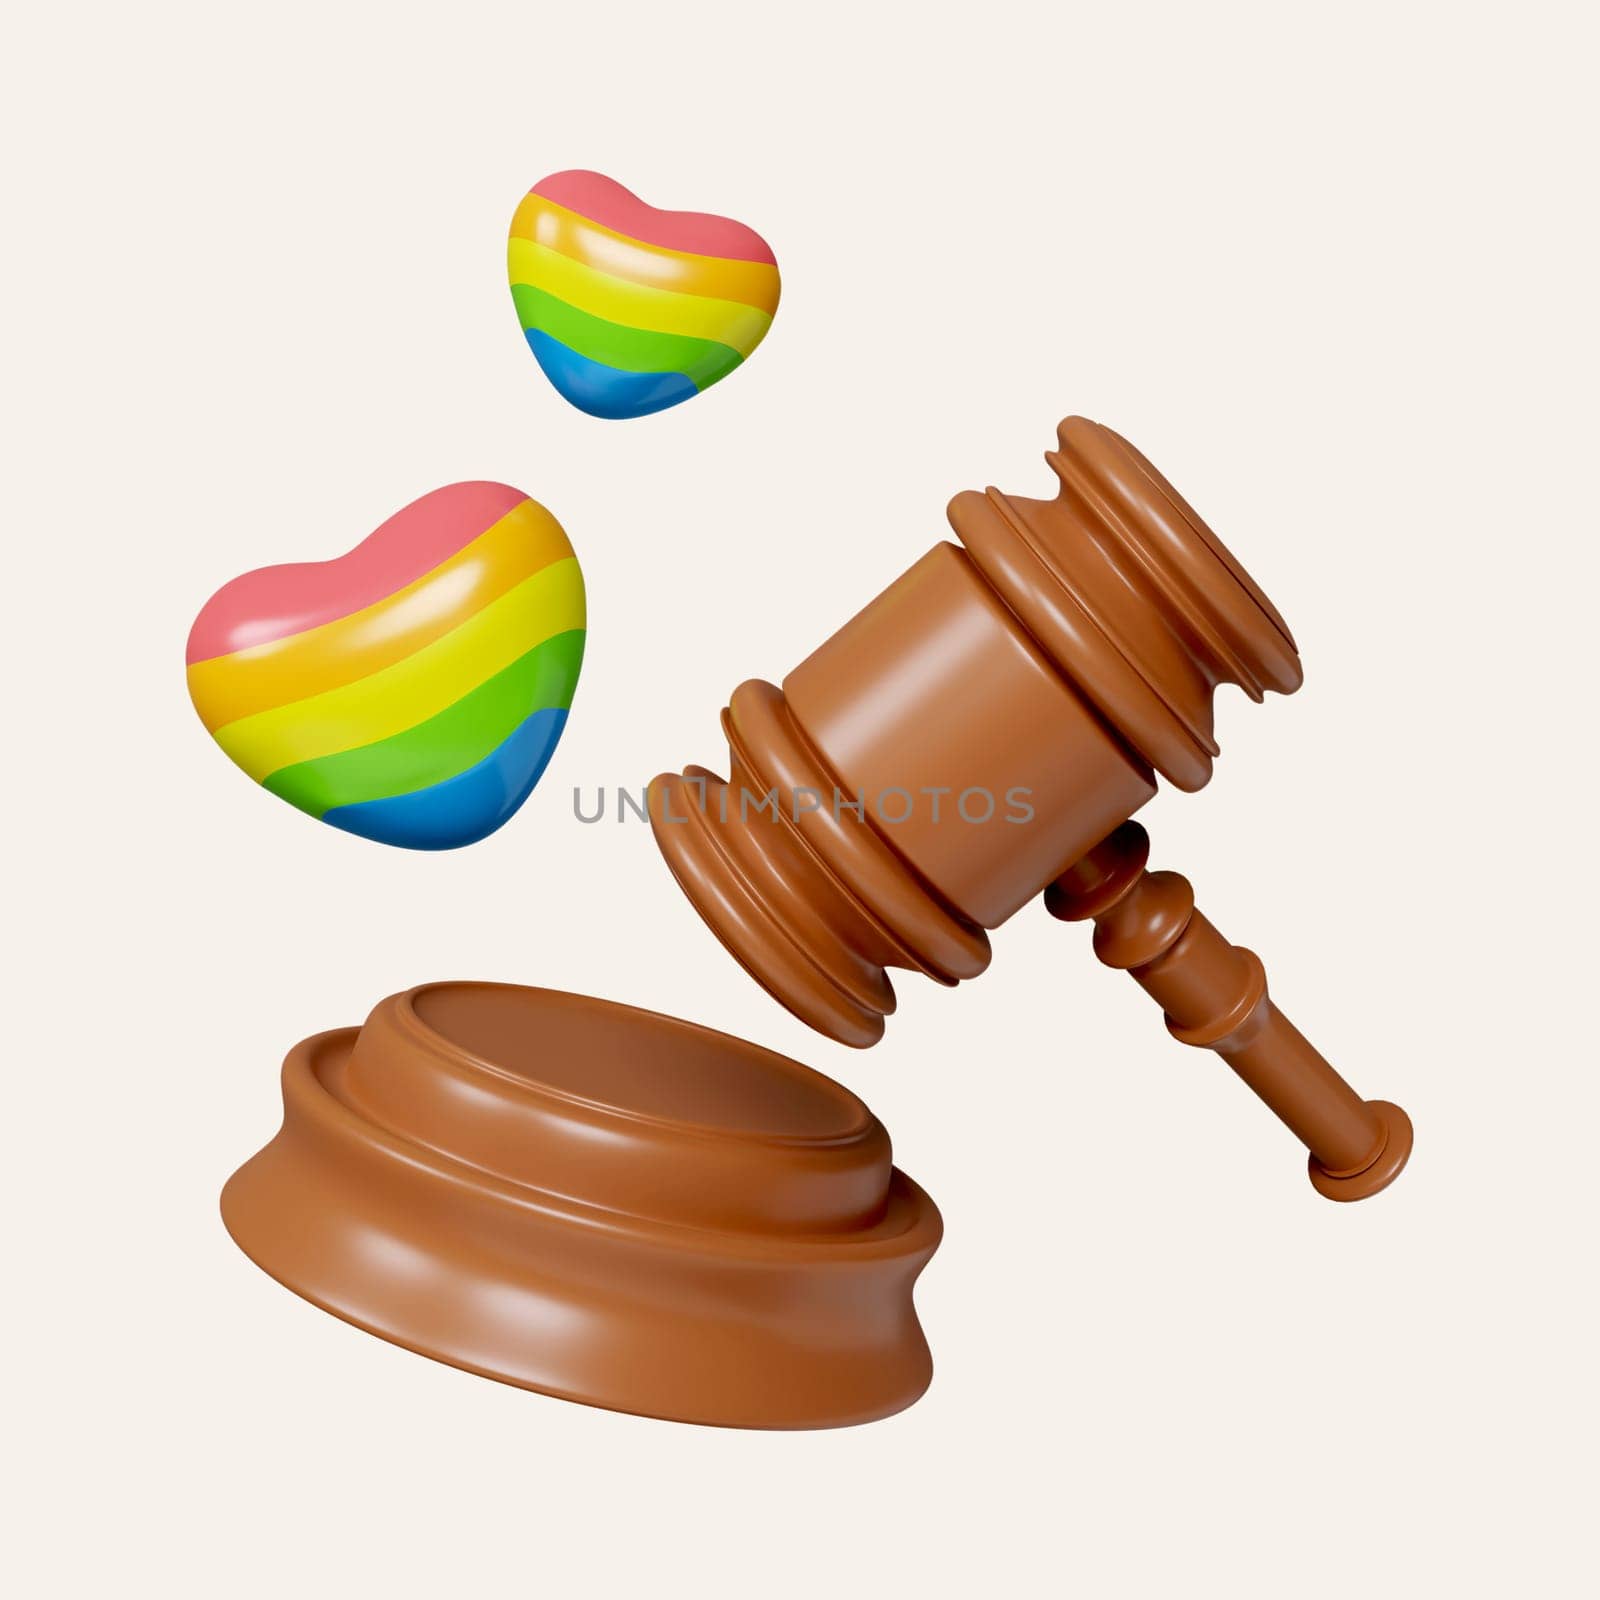 3d Homosexual Rights Concept - Gay Pride Flag Behind Judge's Gavel. icon isolated on white background. 3d rendering illustration. Clipping path..